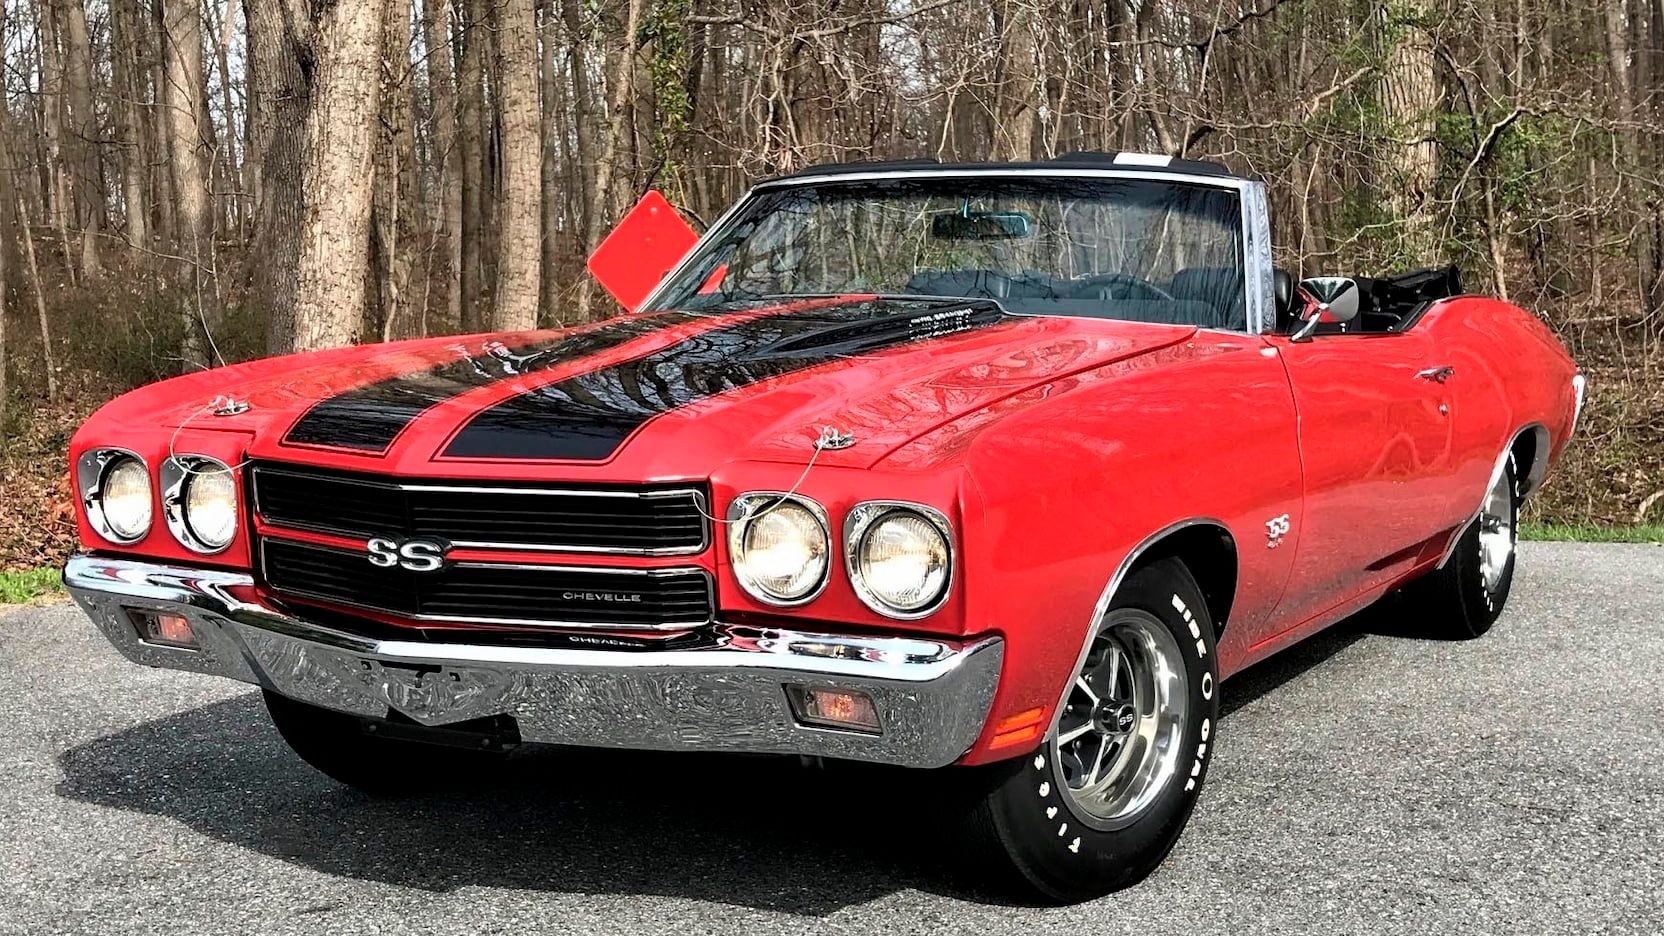 A parked 1970 Chevy Chevelle SS Convertible